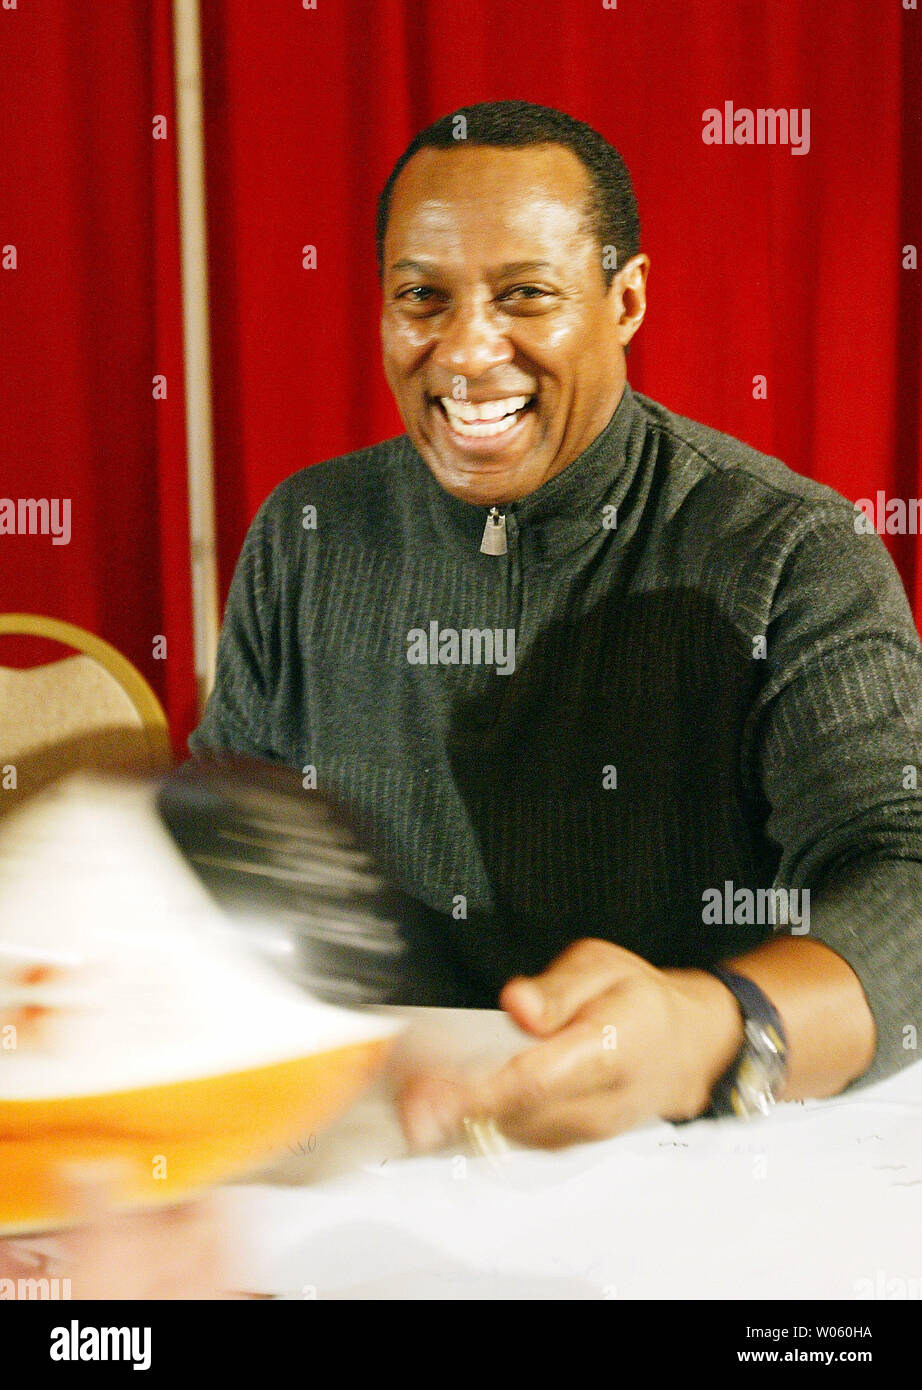 Former St. Louis Cardinals outfielder Tito Landrum smiles as he signs a helmet for a fan during the 9th Annual St. Louis Cardinals Winter Warm-up at the Millennium Hotel in St. Louis on January 17, 2005. The three-day event allows fans to see their favorite Cardinals players, get their autographs and participate in various games and activities. (UPI Photo/Bill Greenblatt) Stock Photo